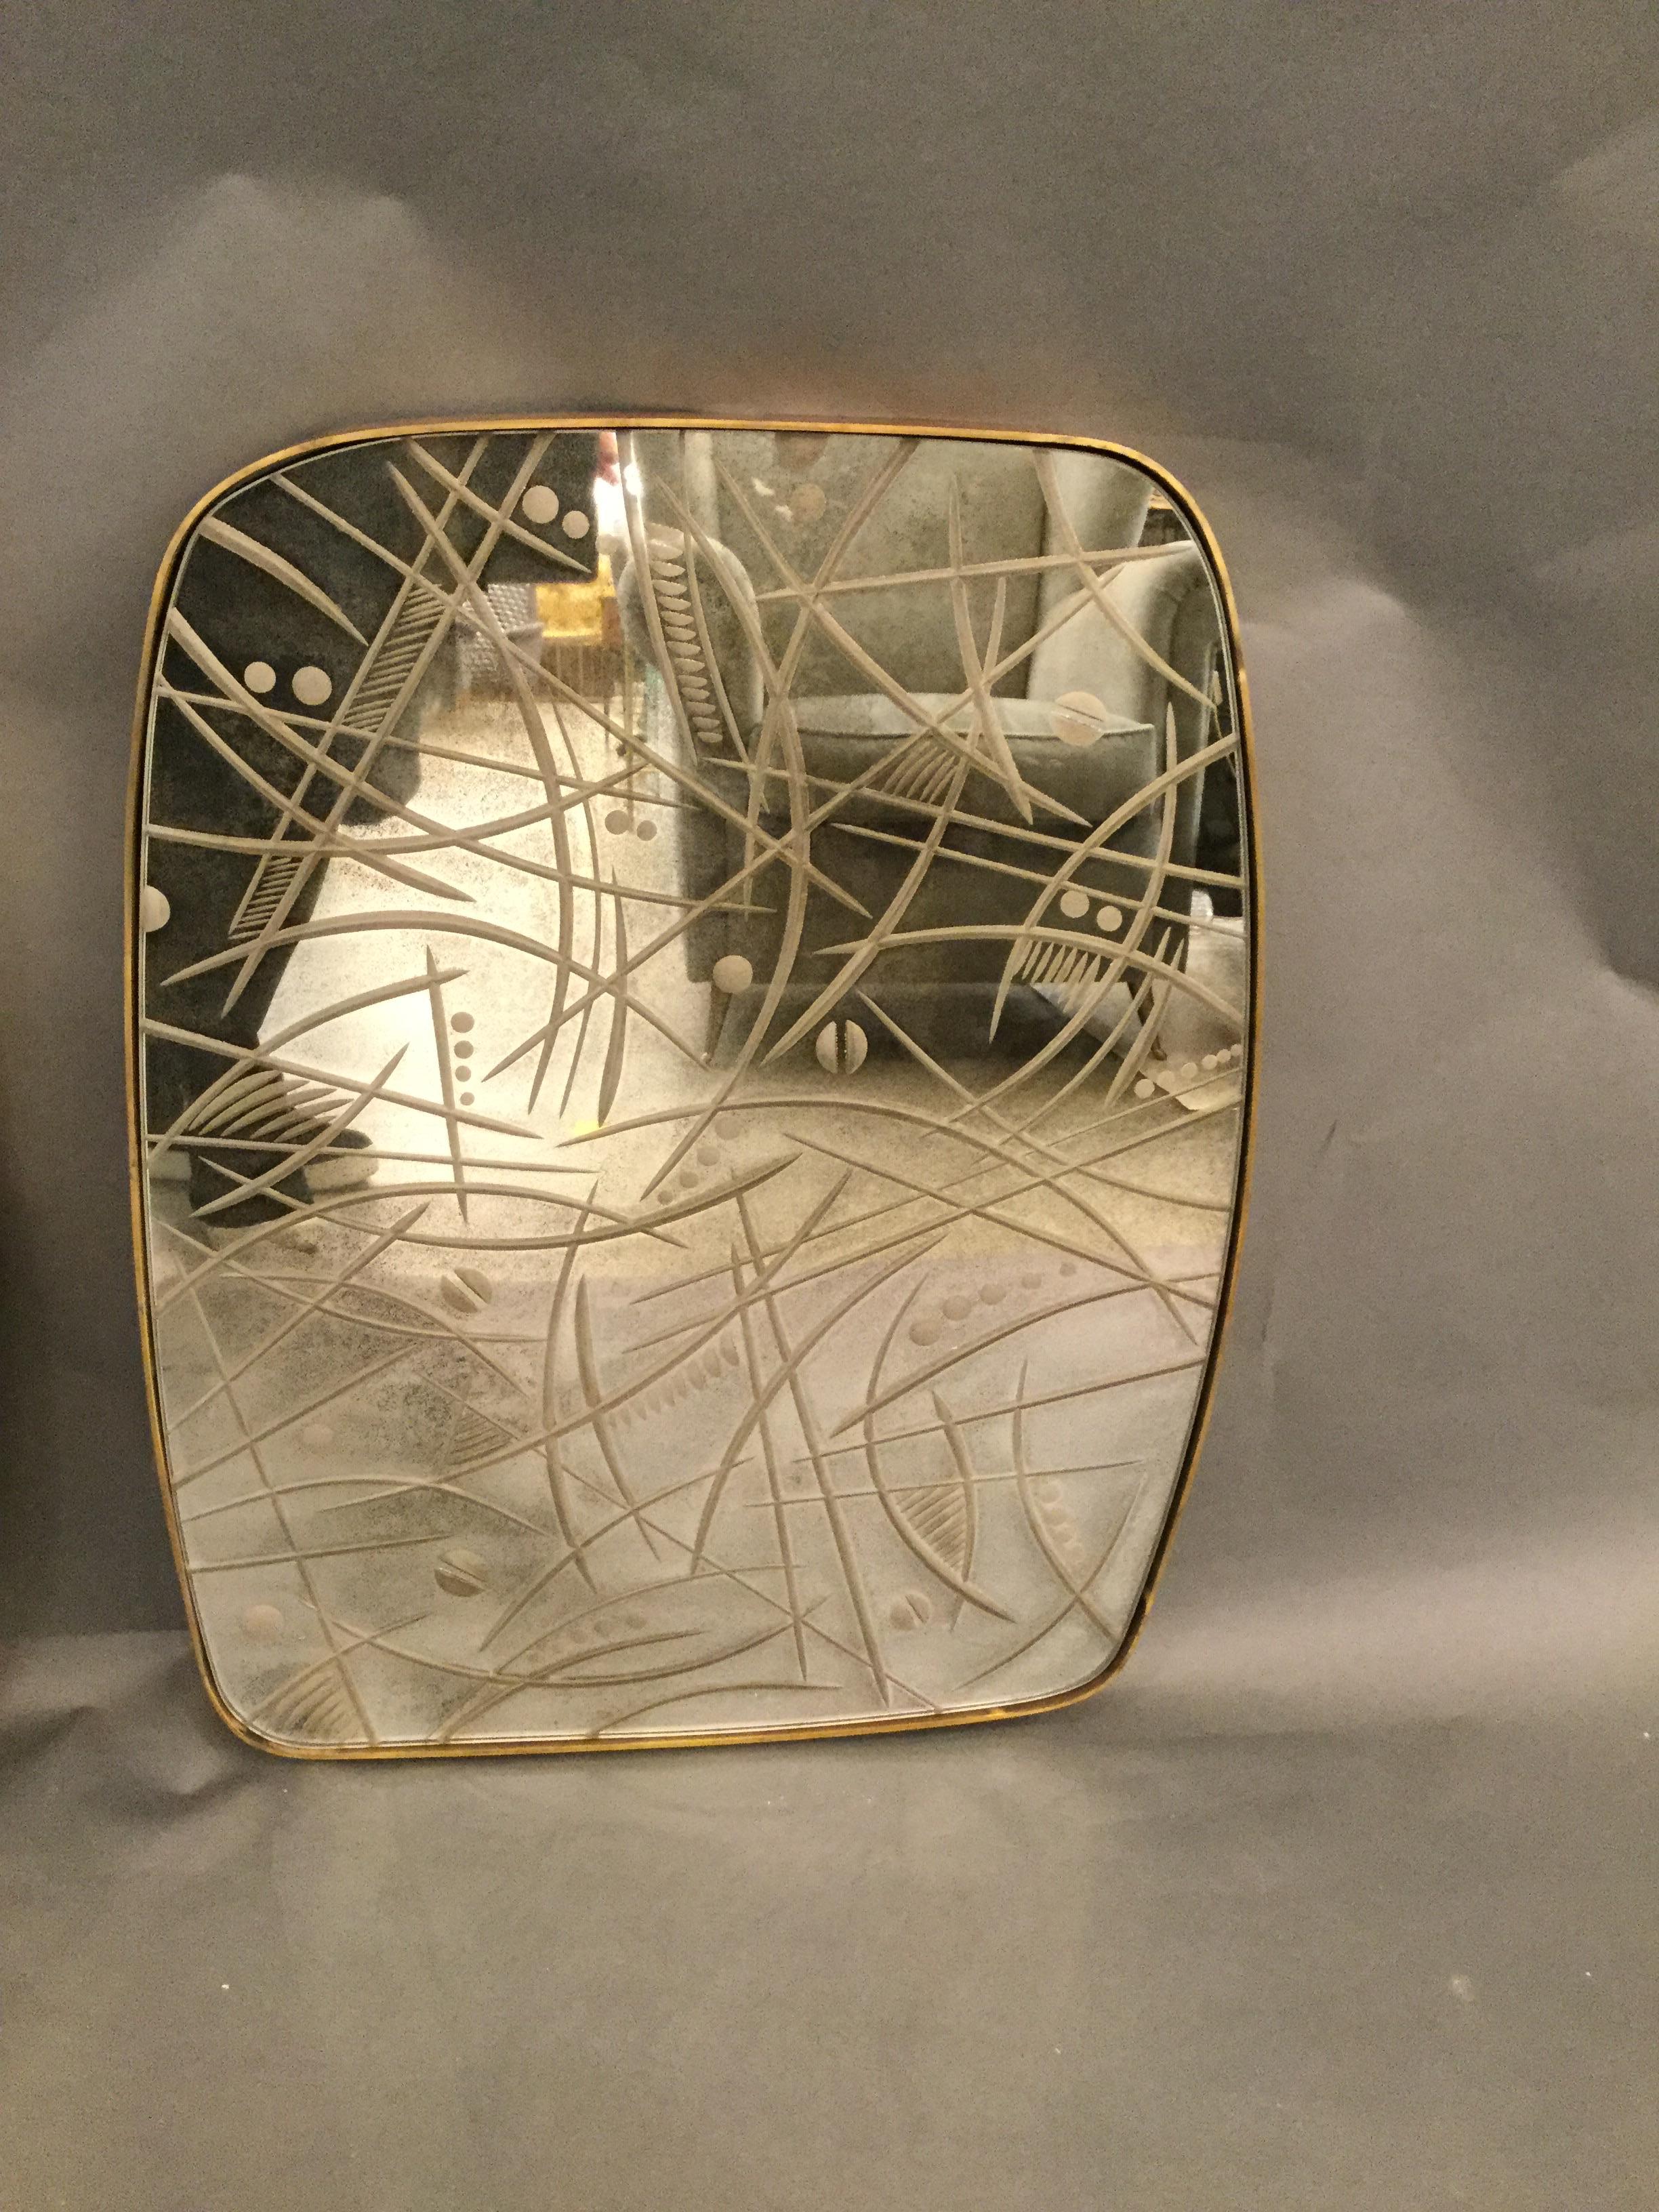 Pair of Italian mirrors with etched glass decorations and brass frame.